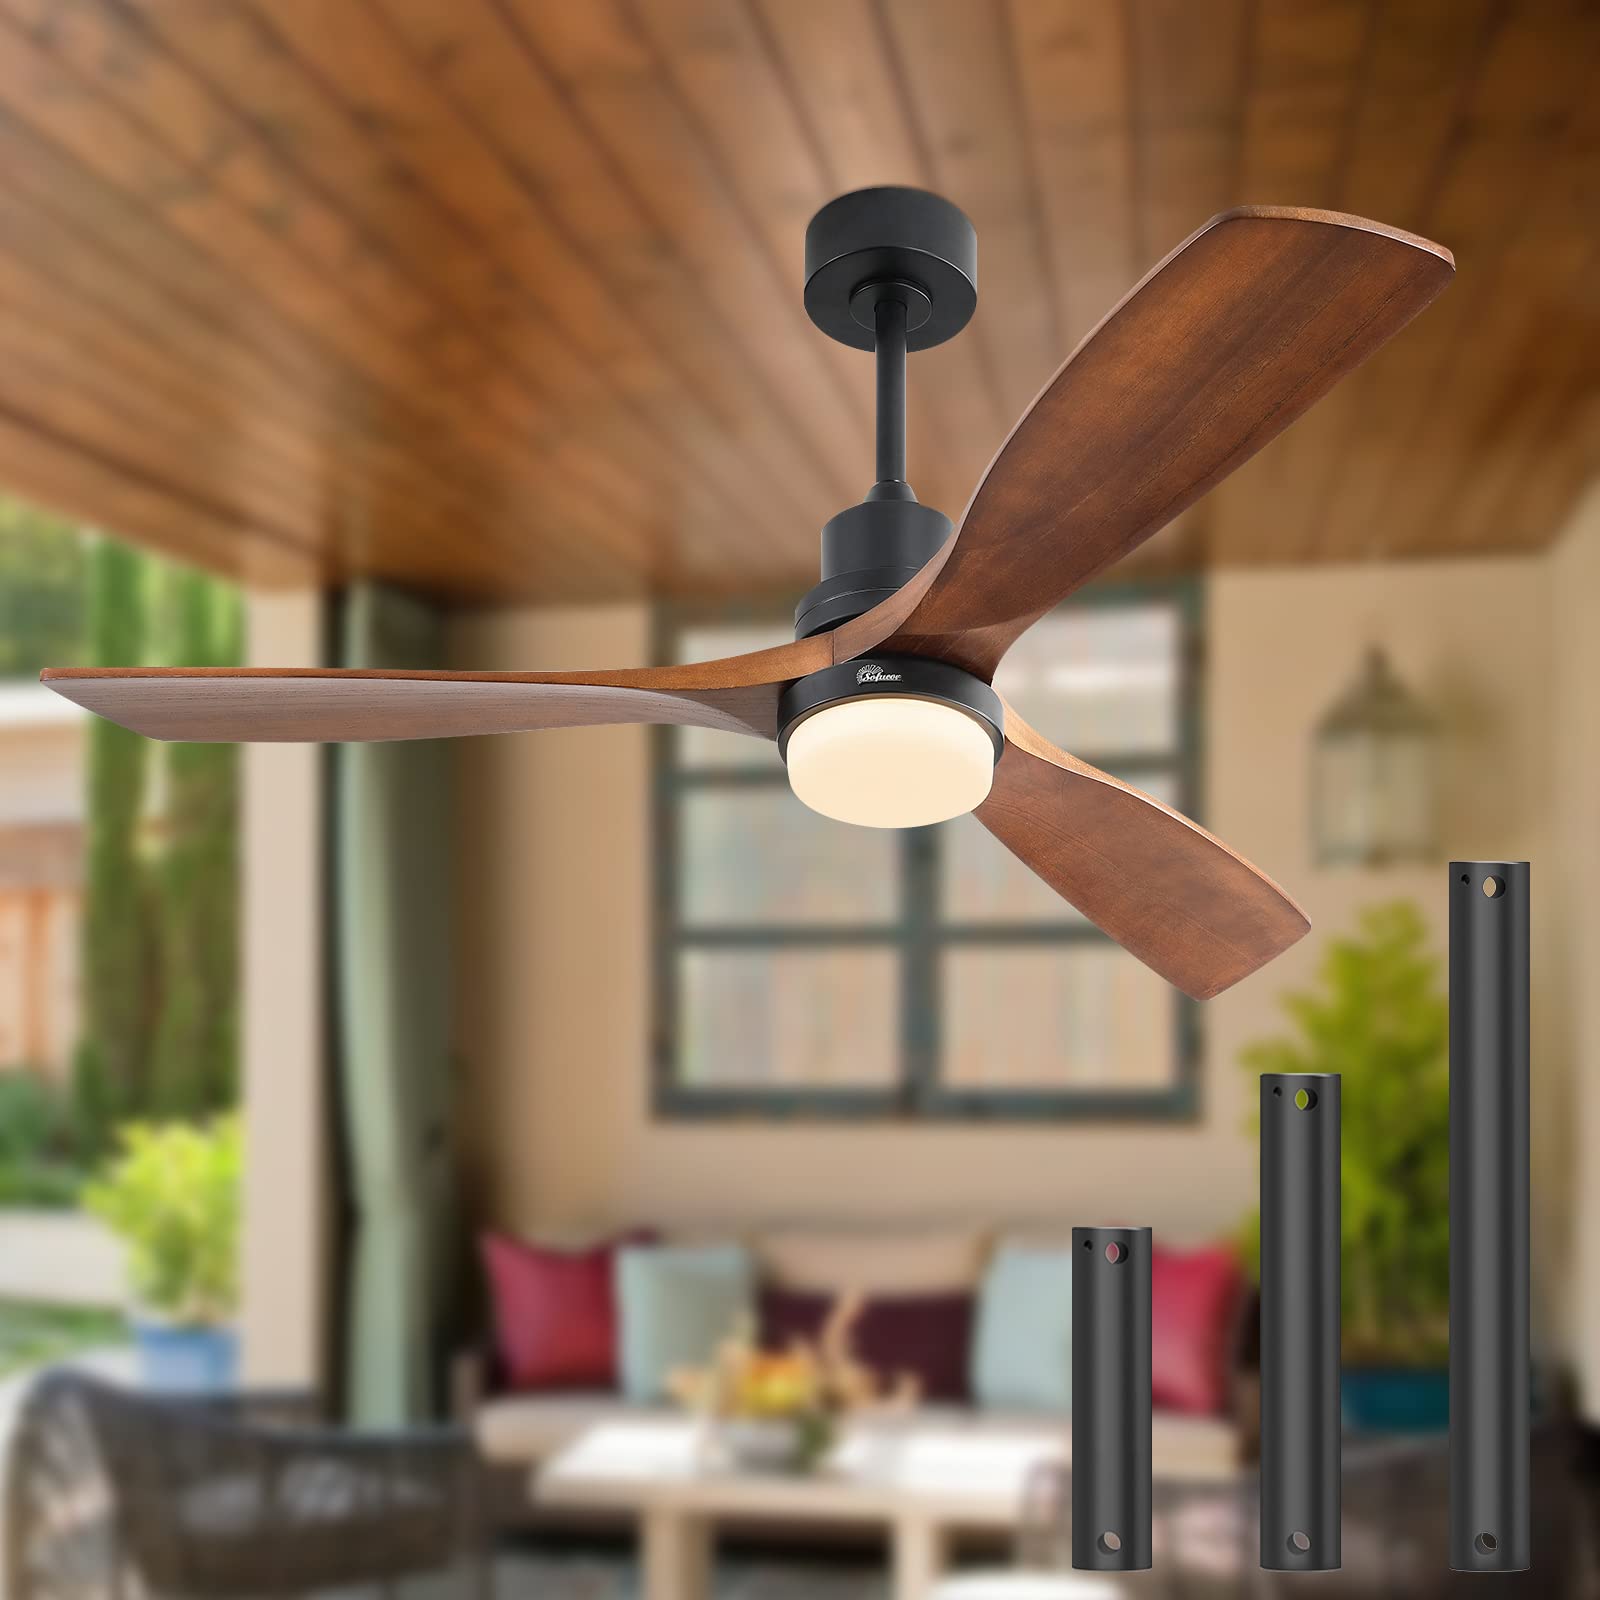 Sofucor Ceiling Fan with Lights Remote Control